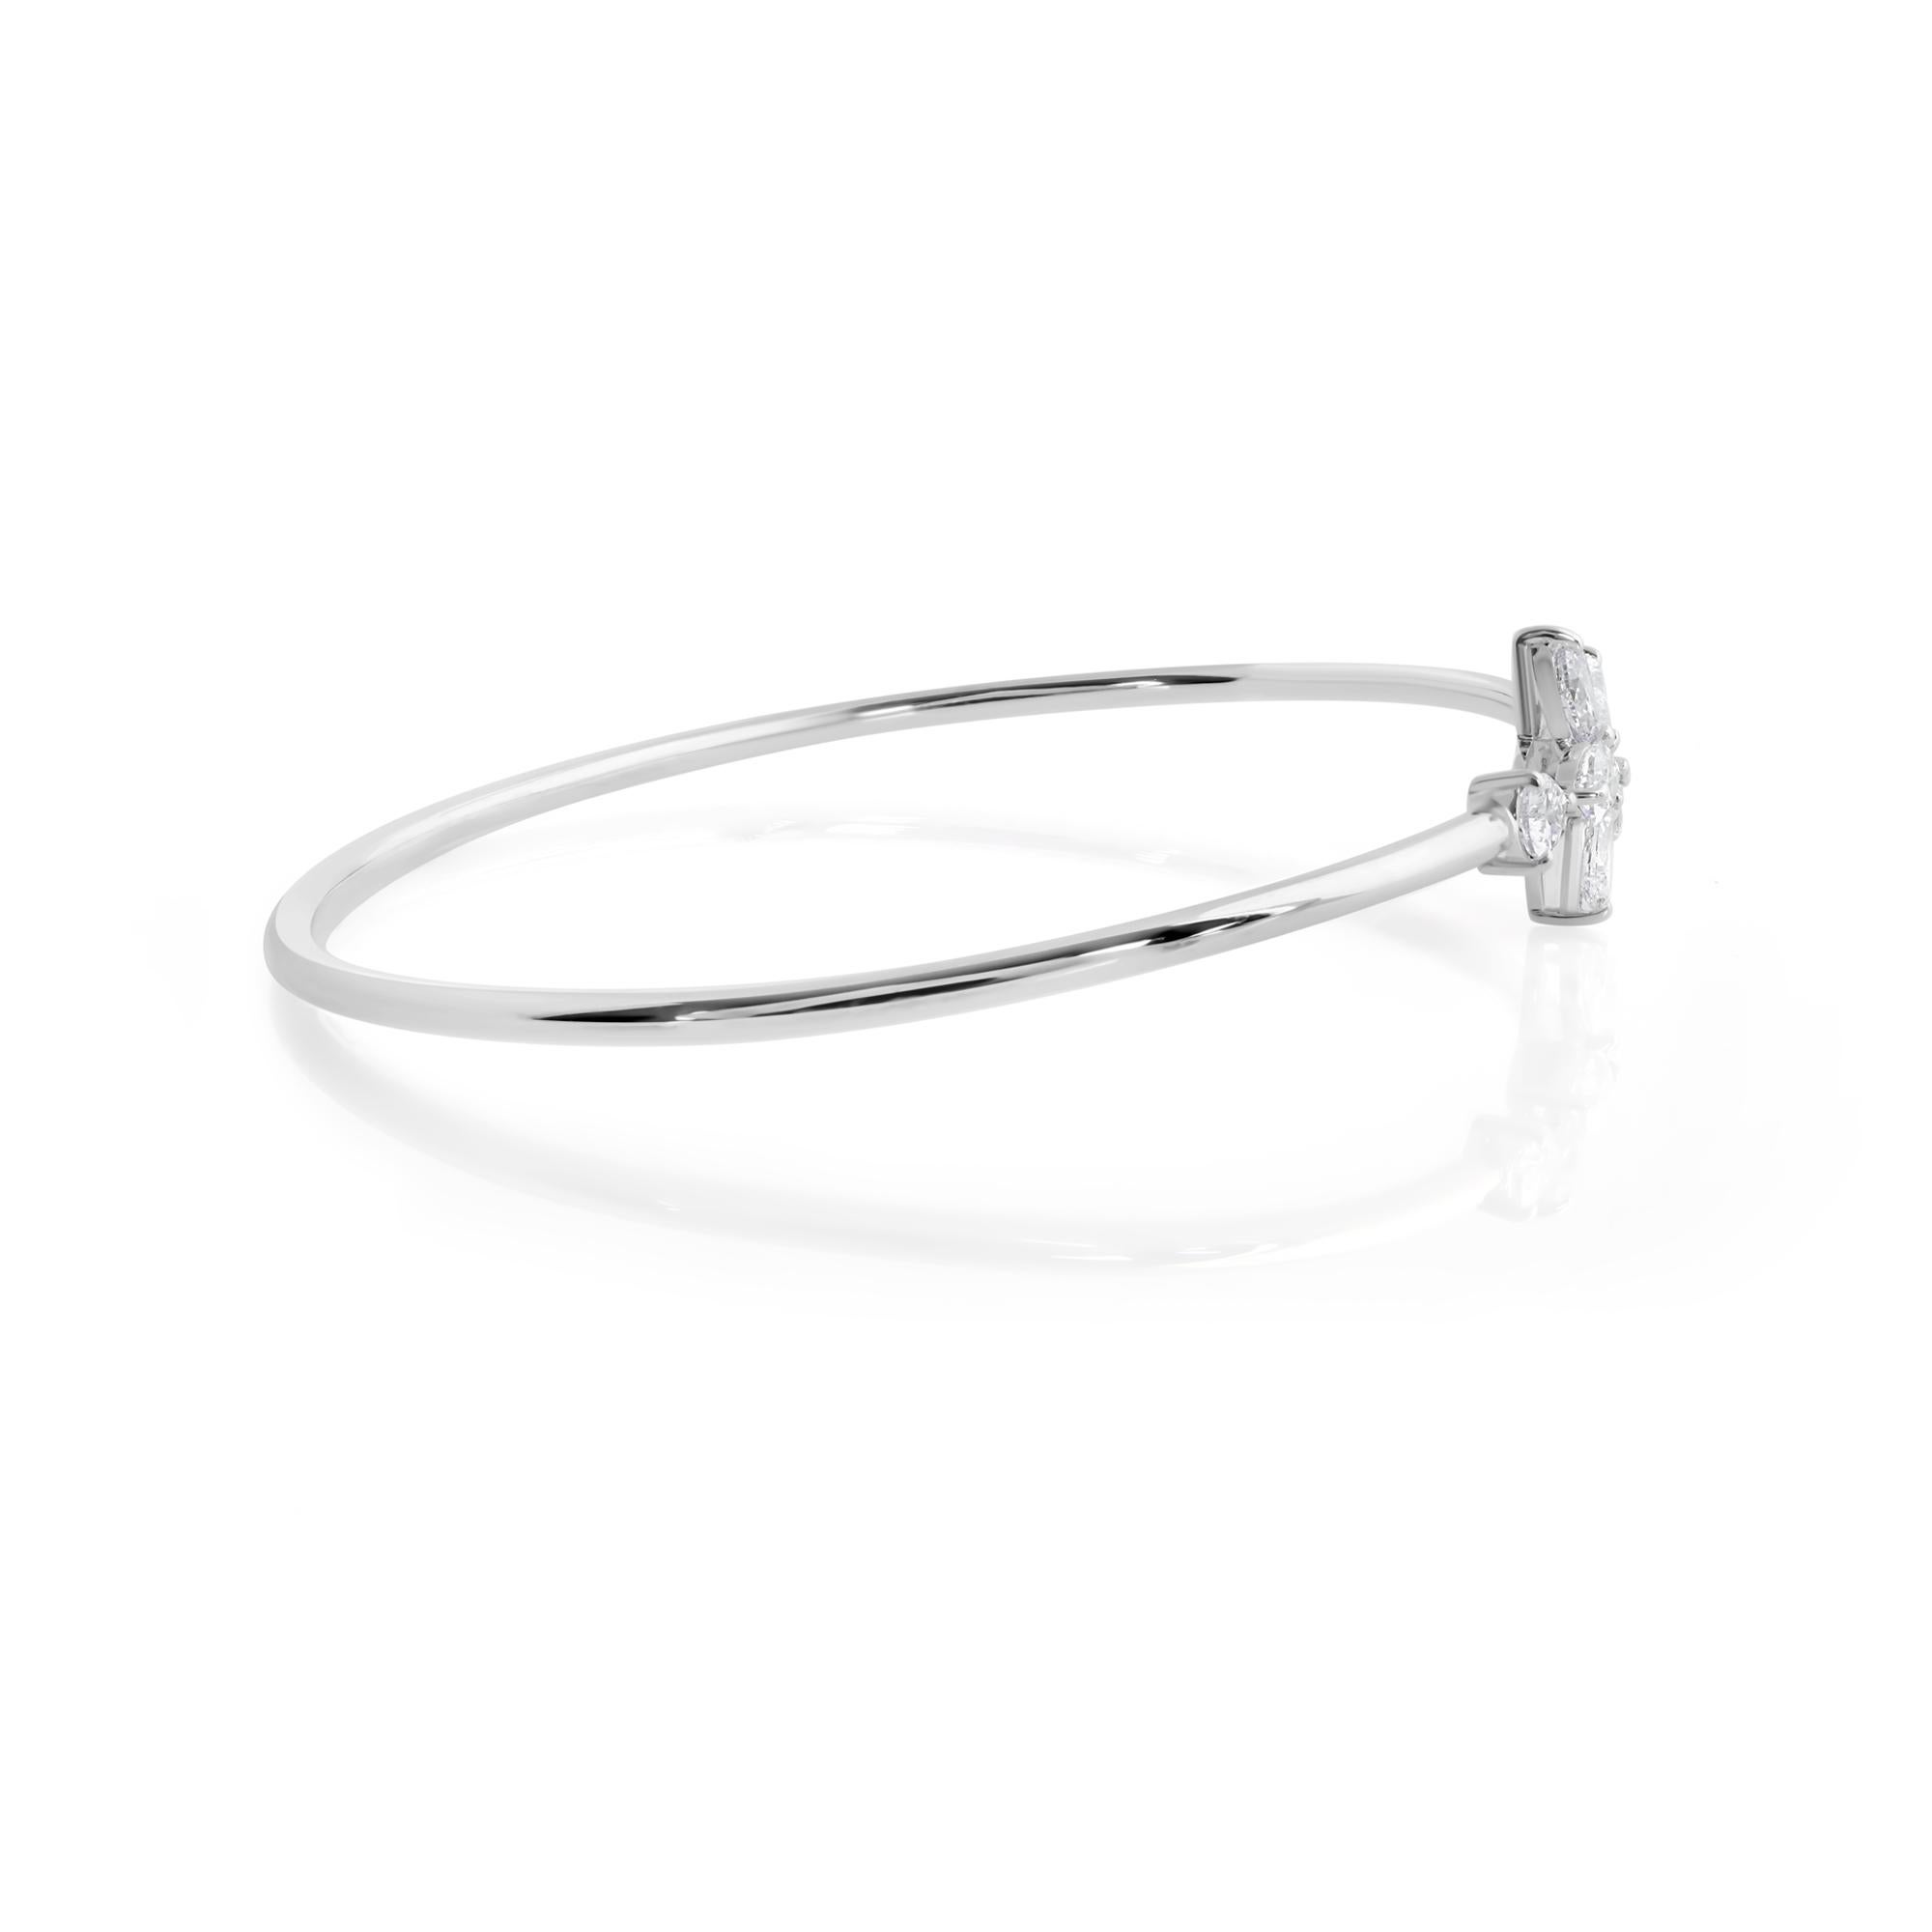 The focal point of this bracelet is undoubtedly the pear-shaped diamond, renowned for its unique and alluring silhouette. With SI clarity, the diamond exhibits minimal inclusions visible only under magnification, ensuring exceptional brilliance and